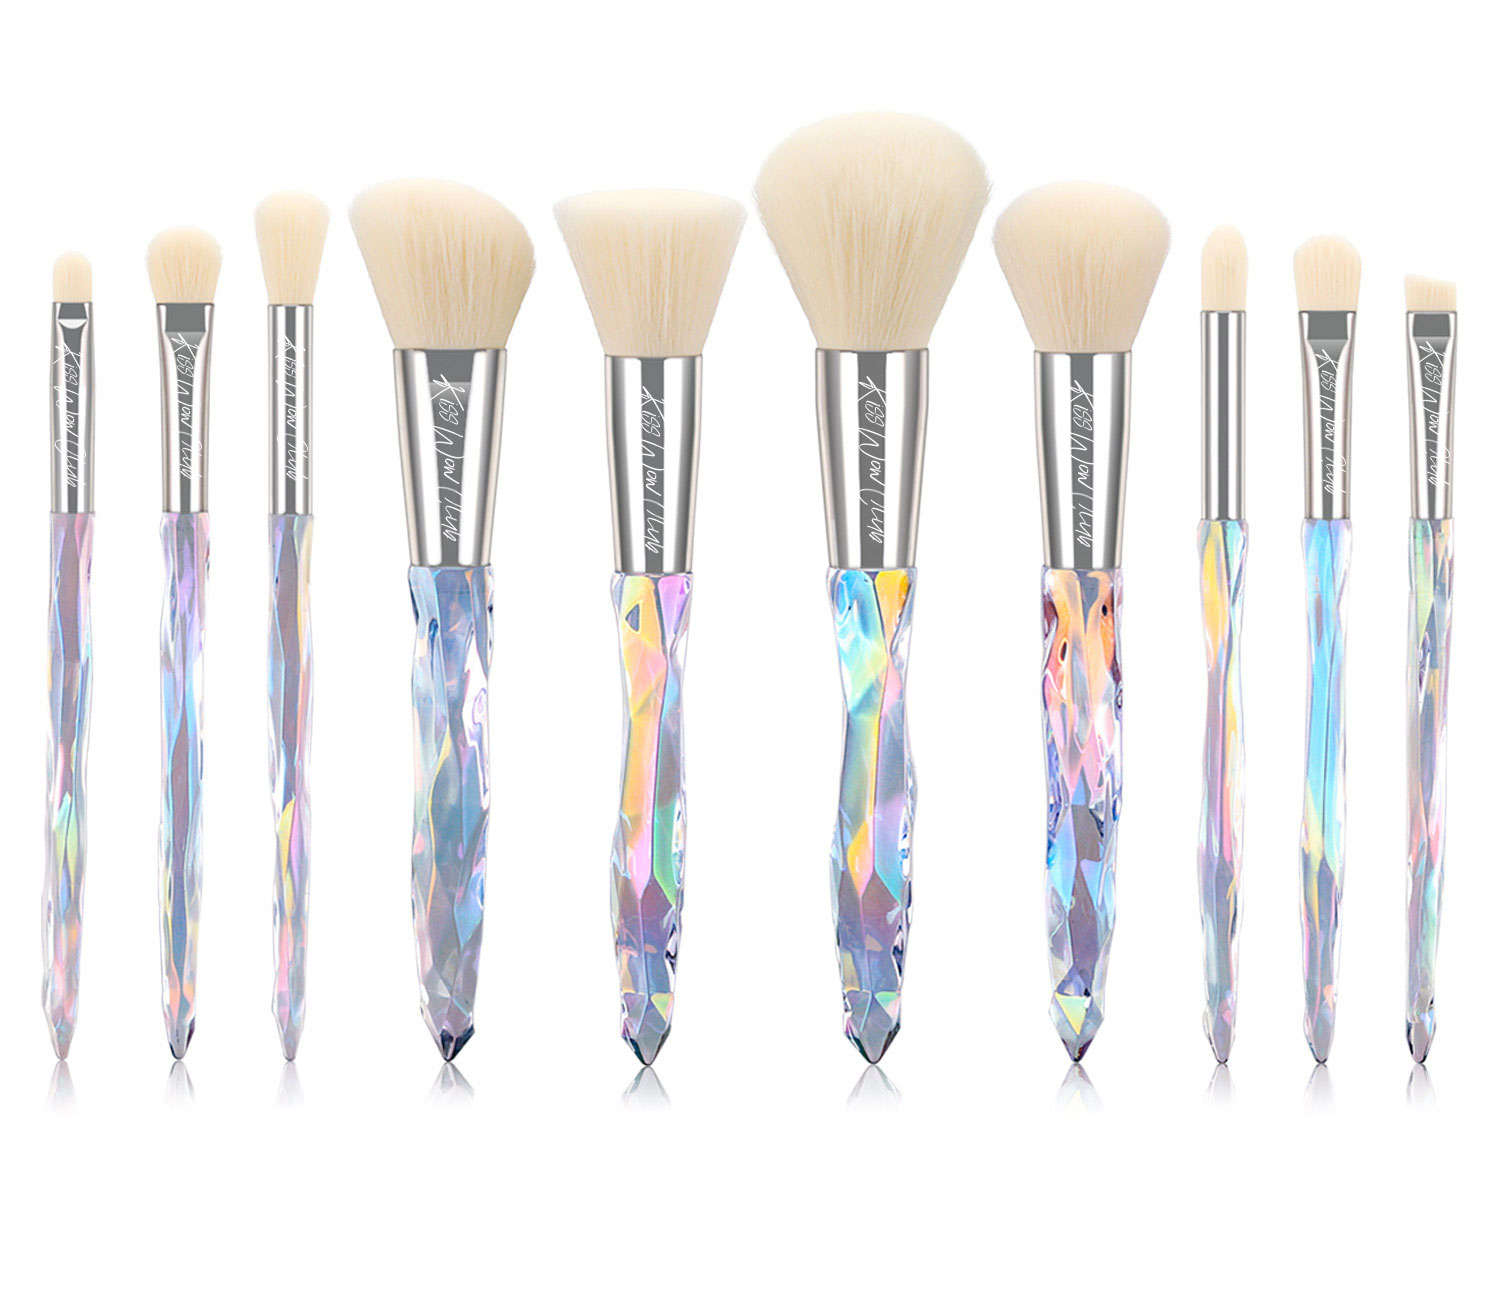 Kiss Wow Club Holographic Crystal Prism Make-up Brush Set with Holographic  Makeup Bag - White - The Kiss Wow Club